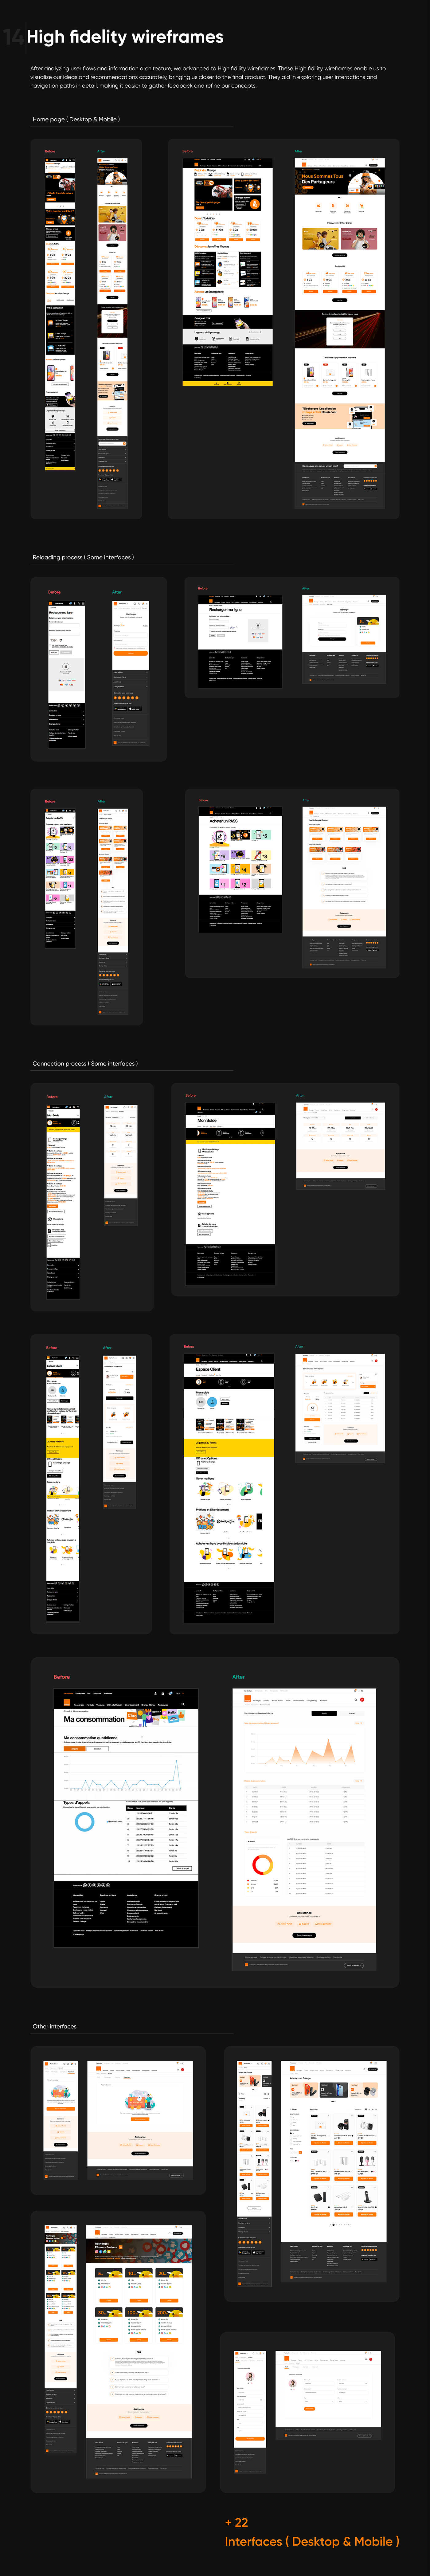 UI/UX redesign user interface user experience UX Case Study Responsive web design